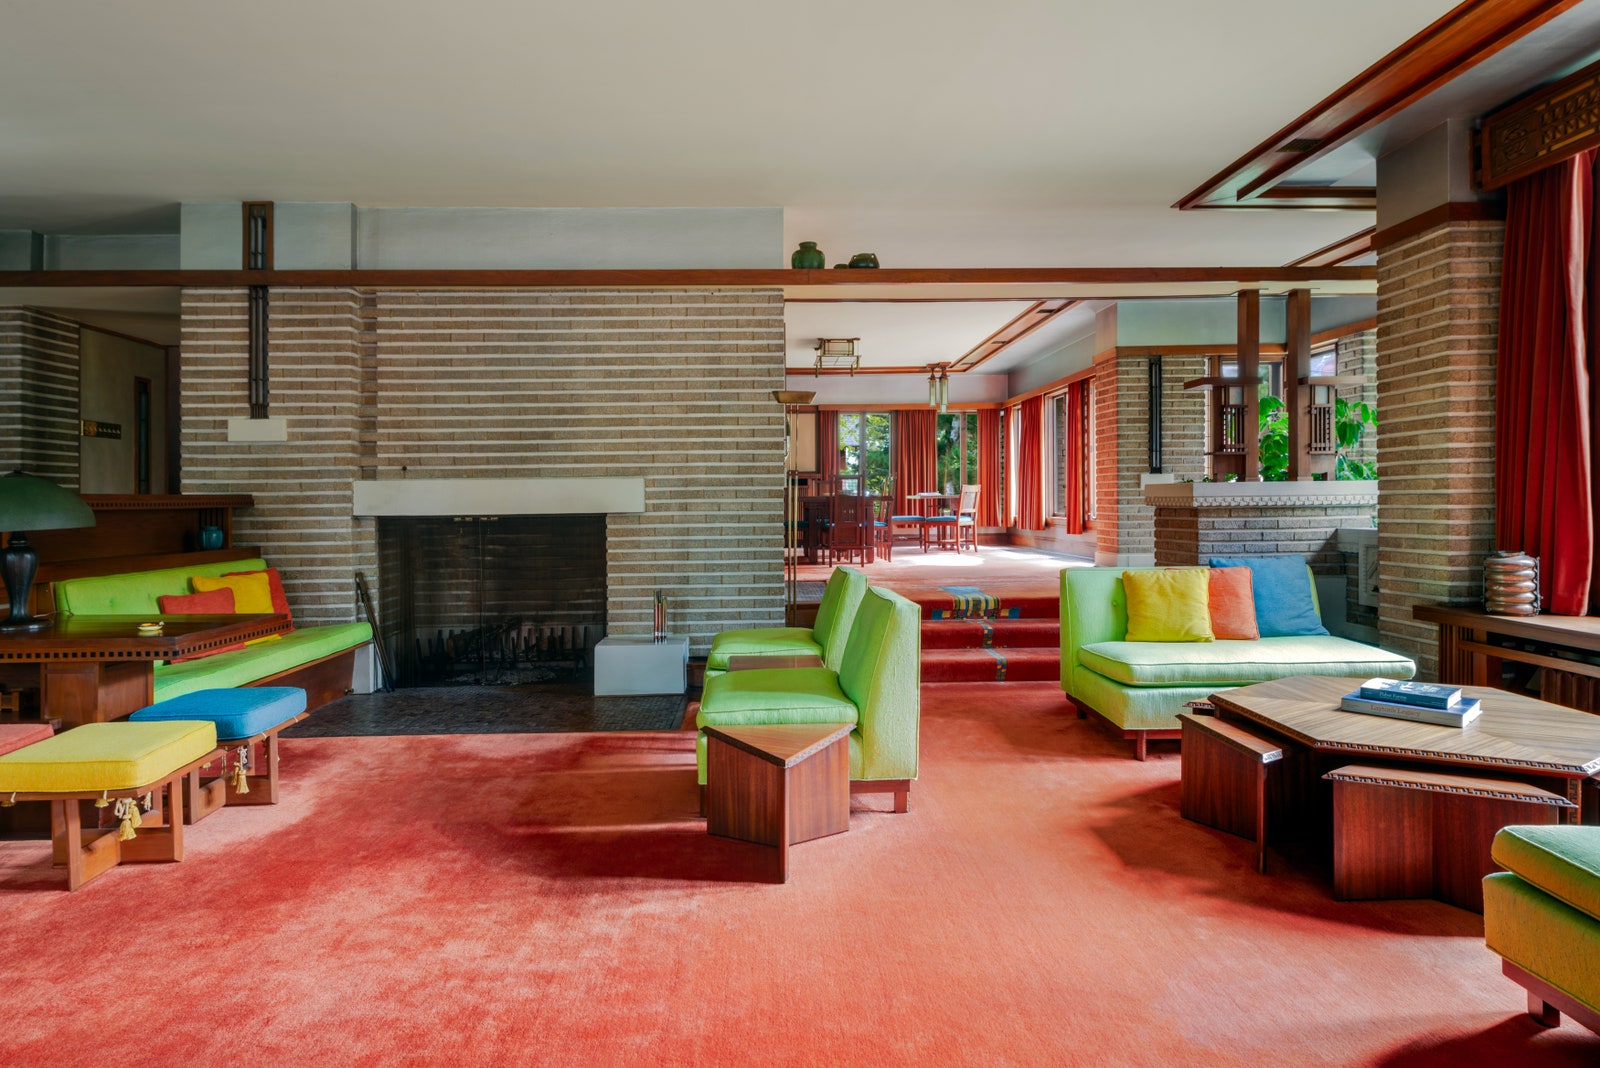 Living room of the Bogk House a home designed by Frank lloyd wright. Red carpets and midcentury furniture in primary...